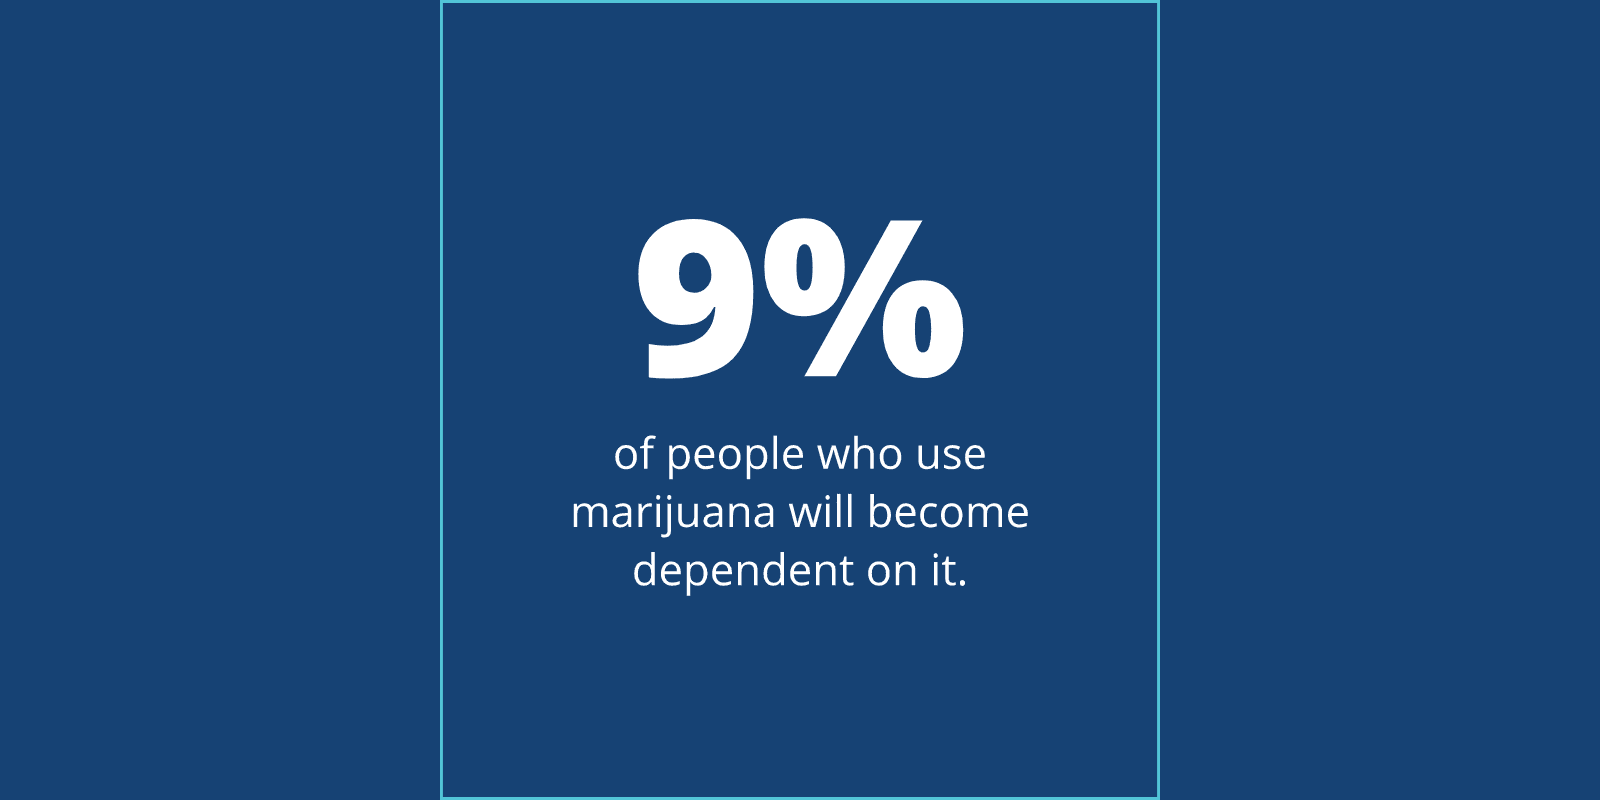 9% of people who use marijuana will become dependent on it